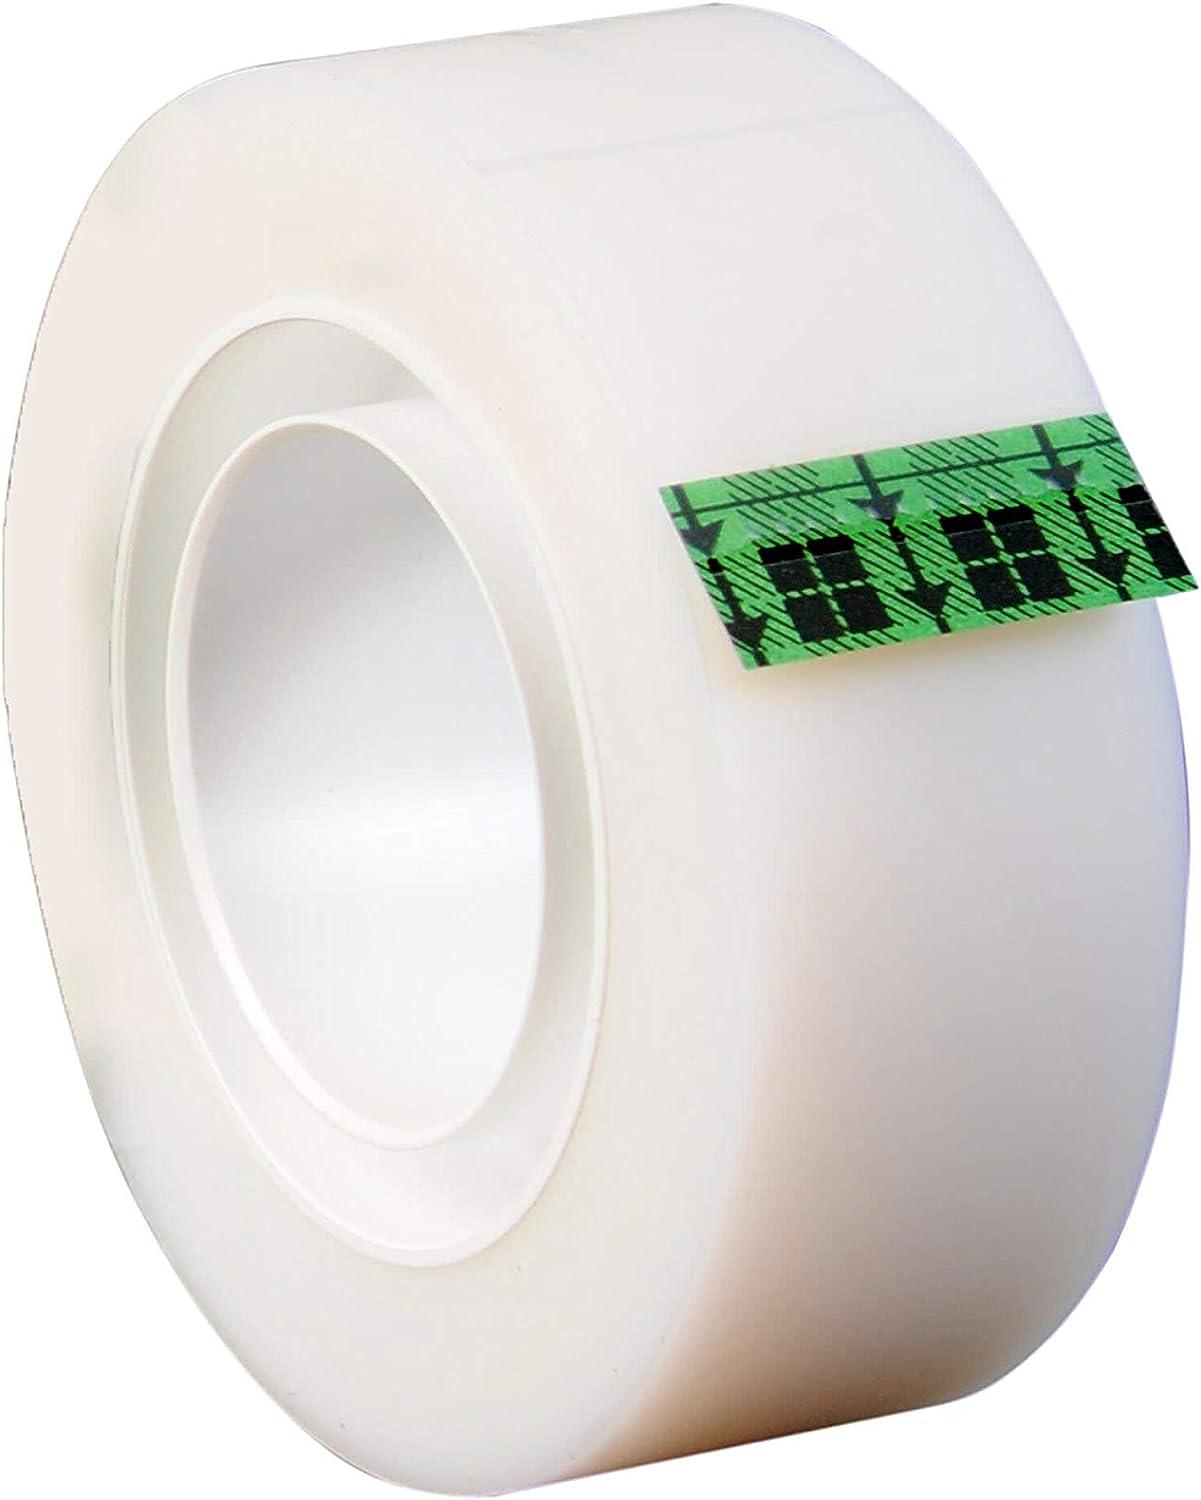 Scotch® Double-Sided Tape Dispensered Rolls